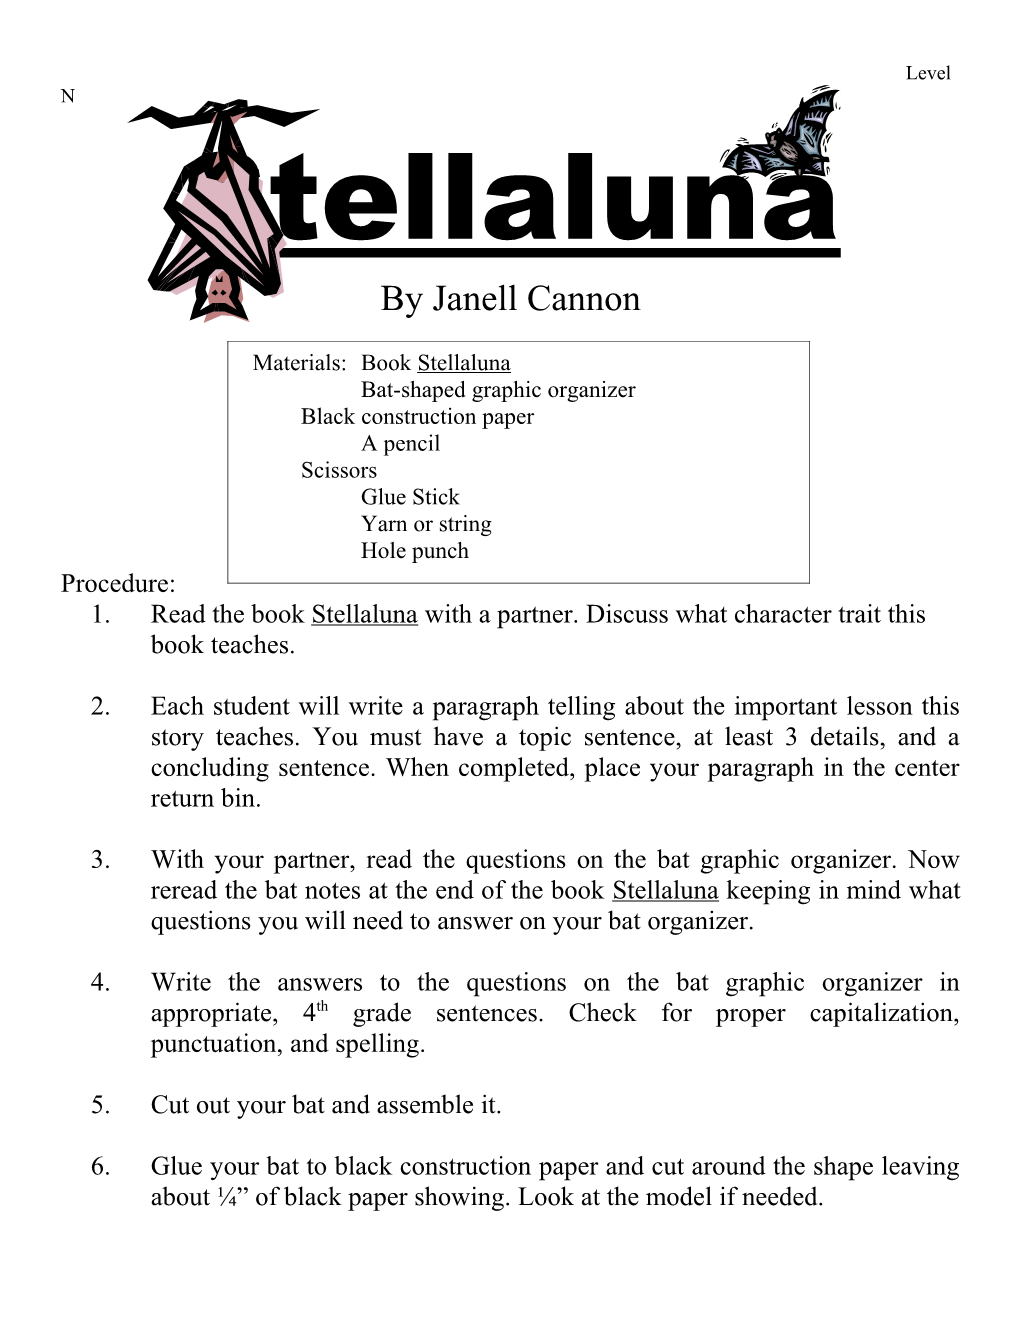 1. Read the Book Stellaluna with a Partner. Discuss What Character Trait This Book Teaches